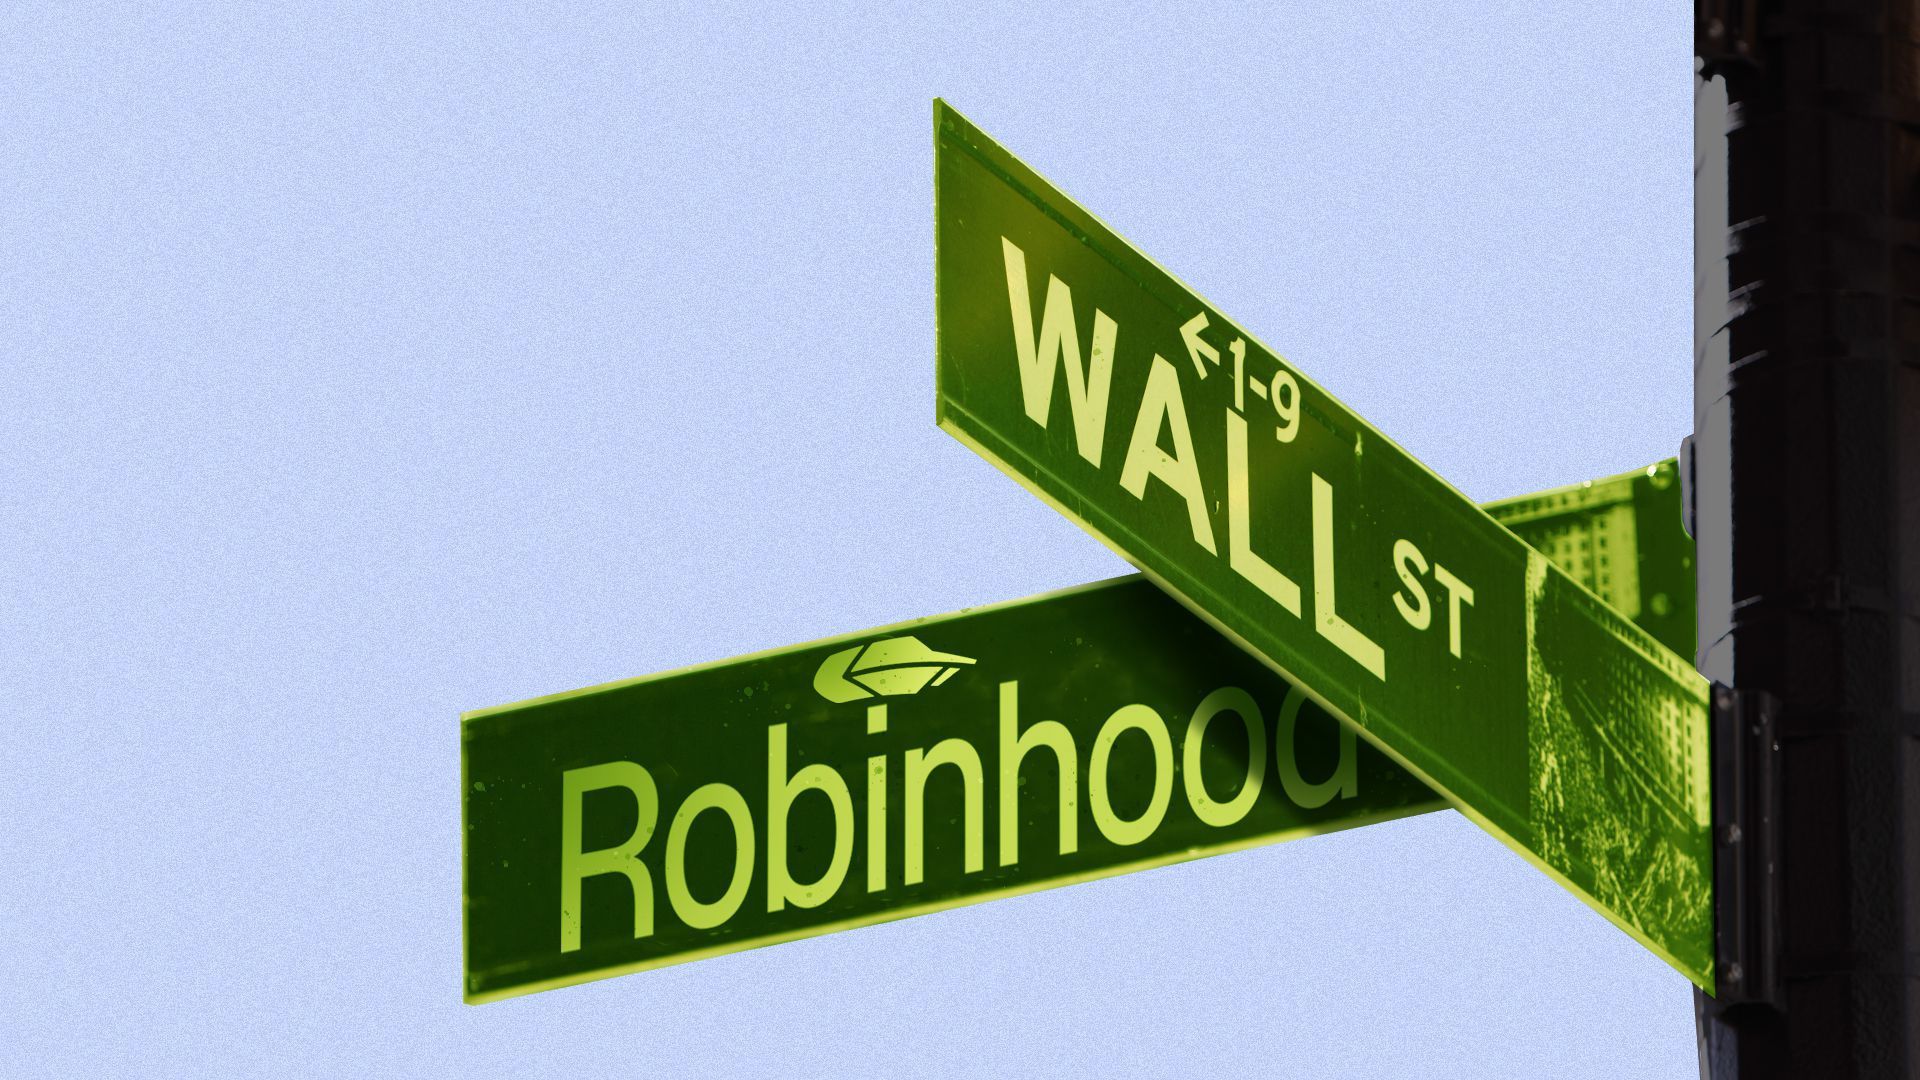 Illustration of two street signs intersecting: Robinhood, and Wall st